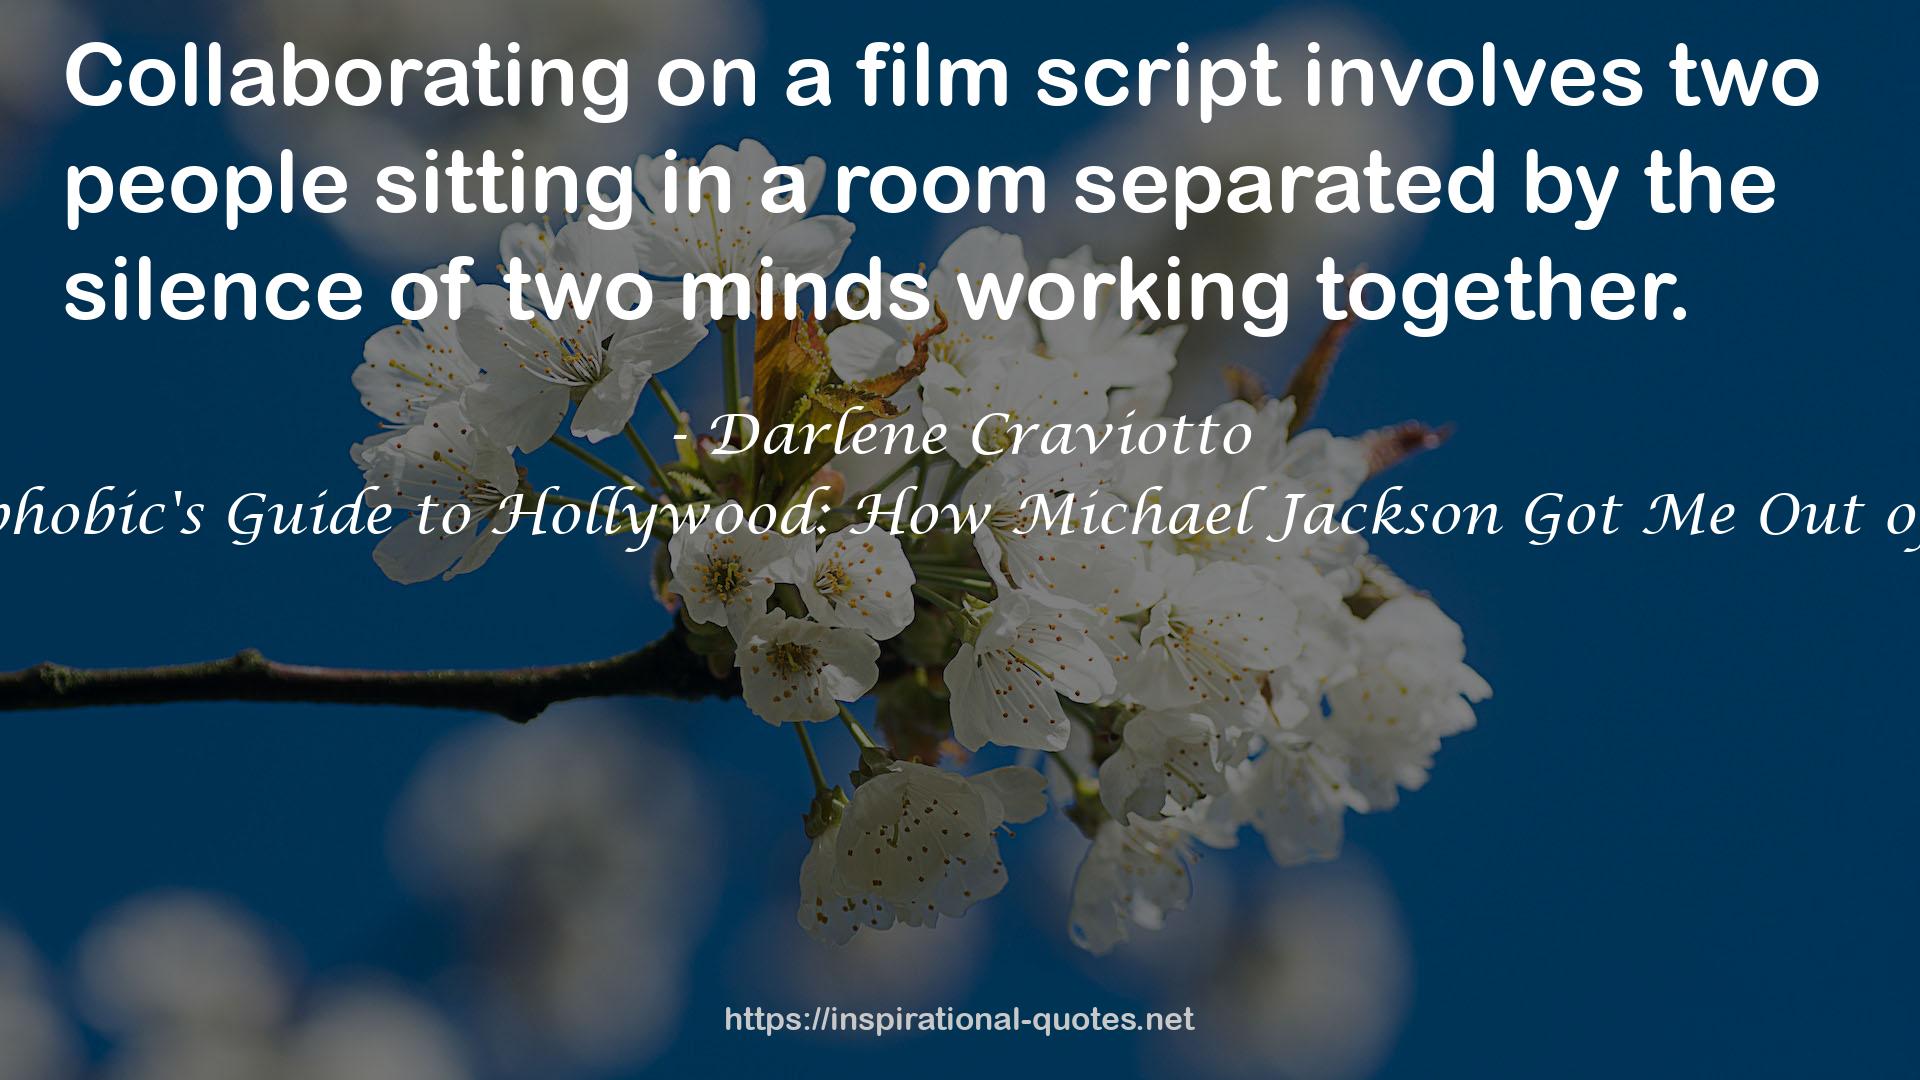 An Agoraphobic's Guide to Hollywood: How Michael Jackson Got Me Out of the House QUOTES